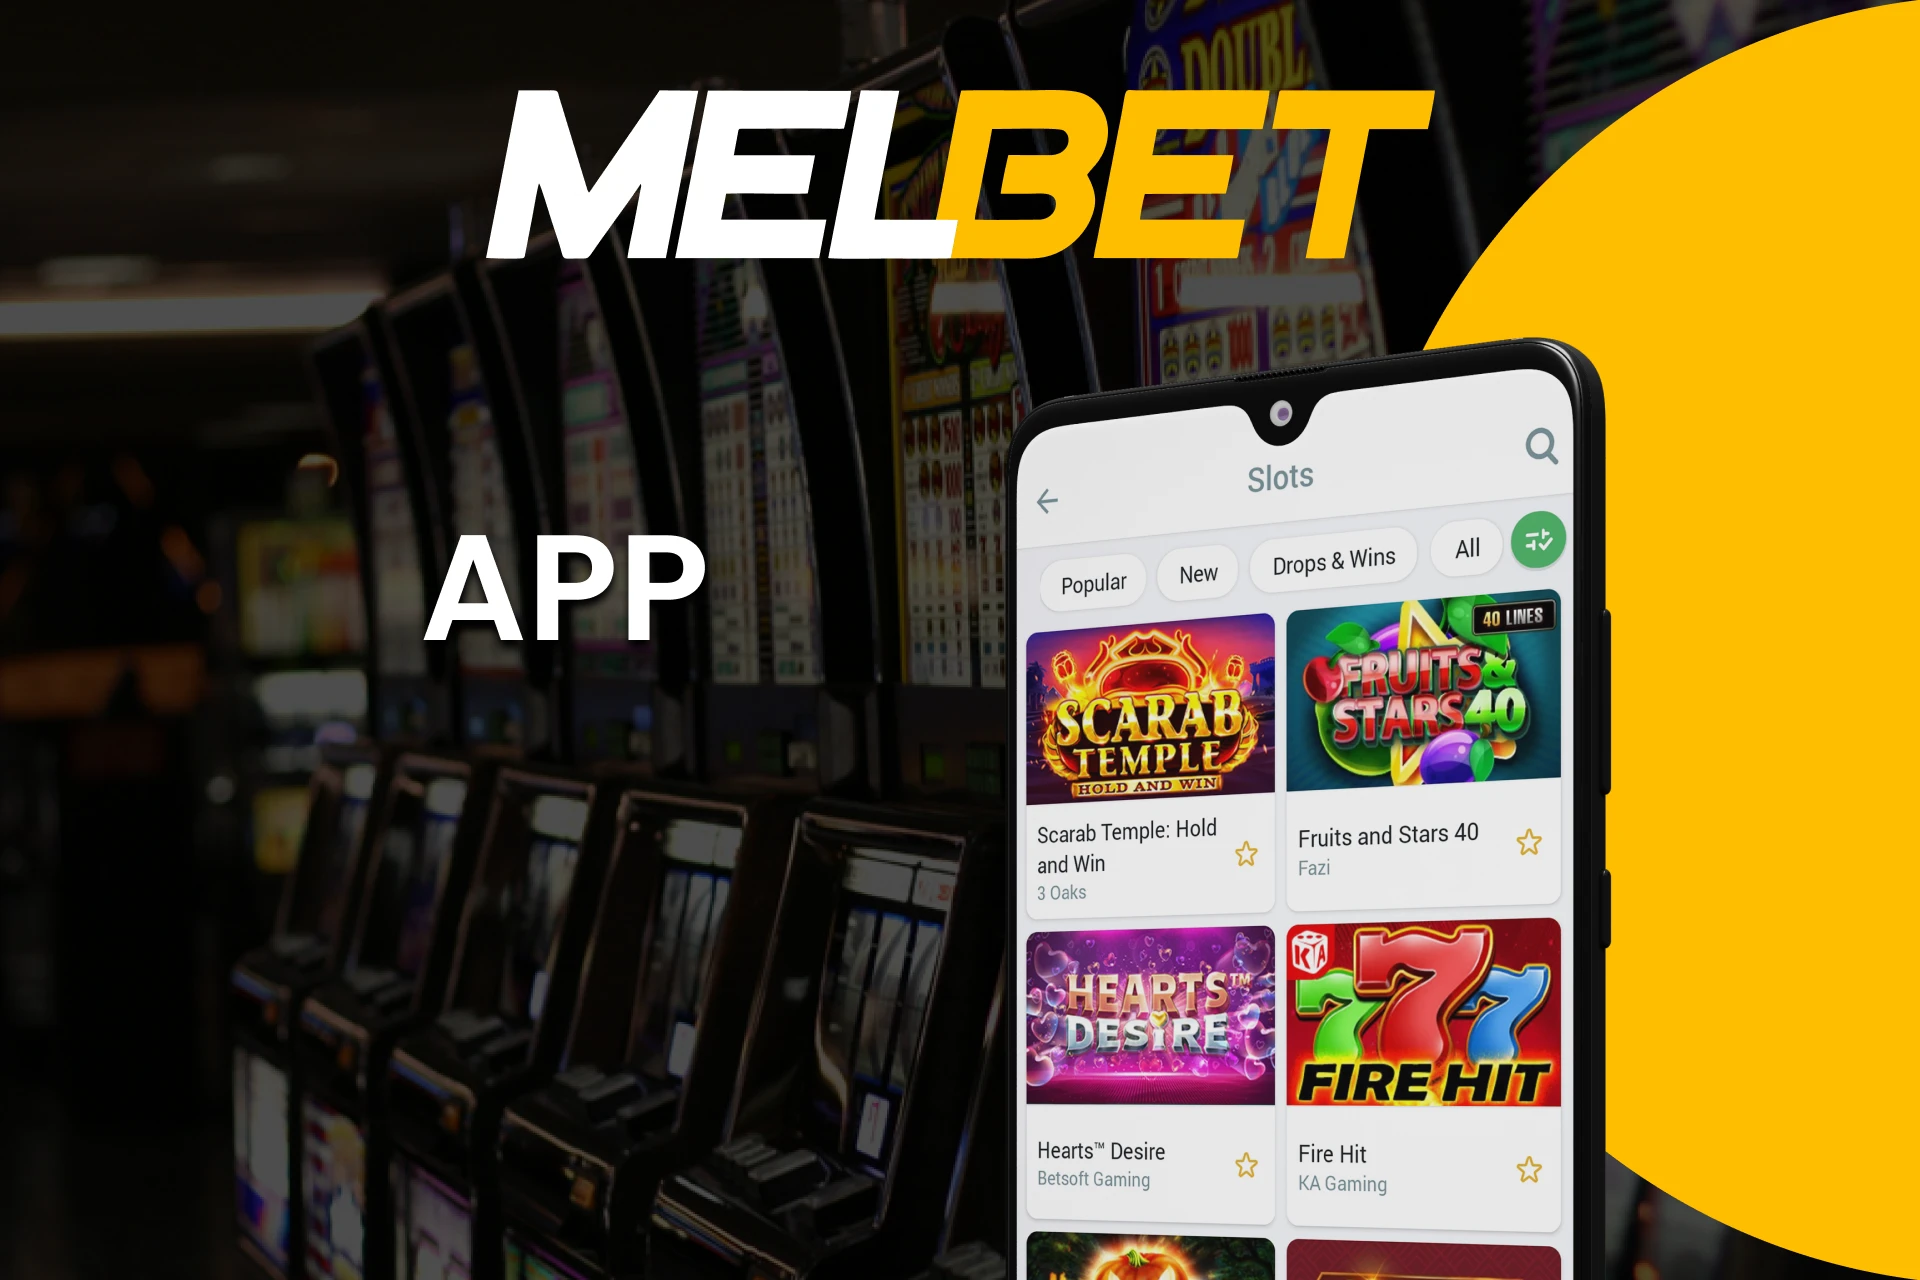 Install the Melbet app to play Jackpot.